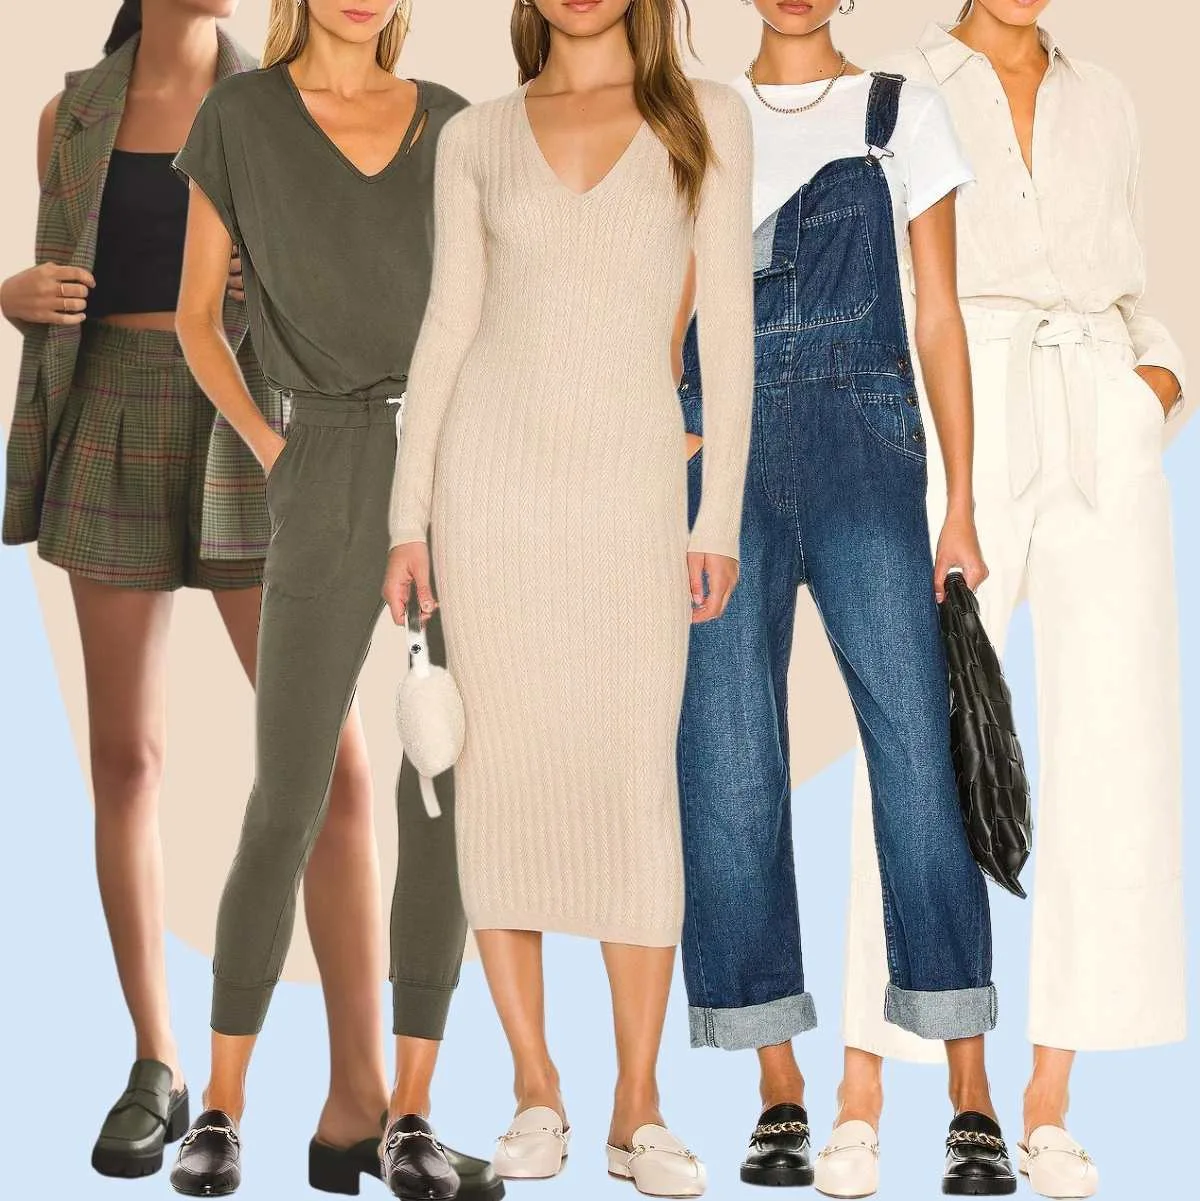 Collage of 5 women wearing different loafer mules outfits.